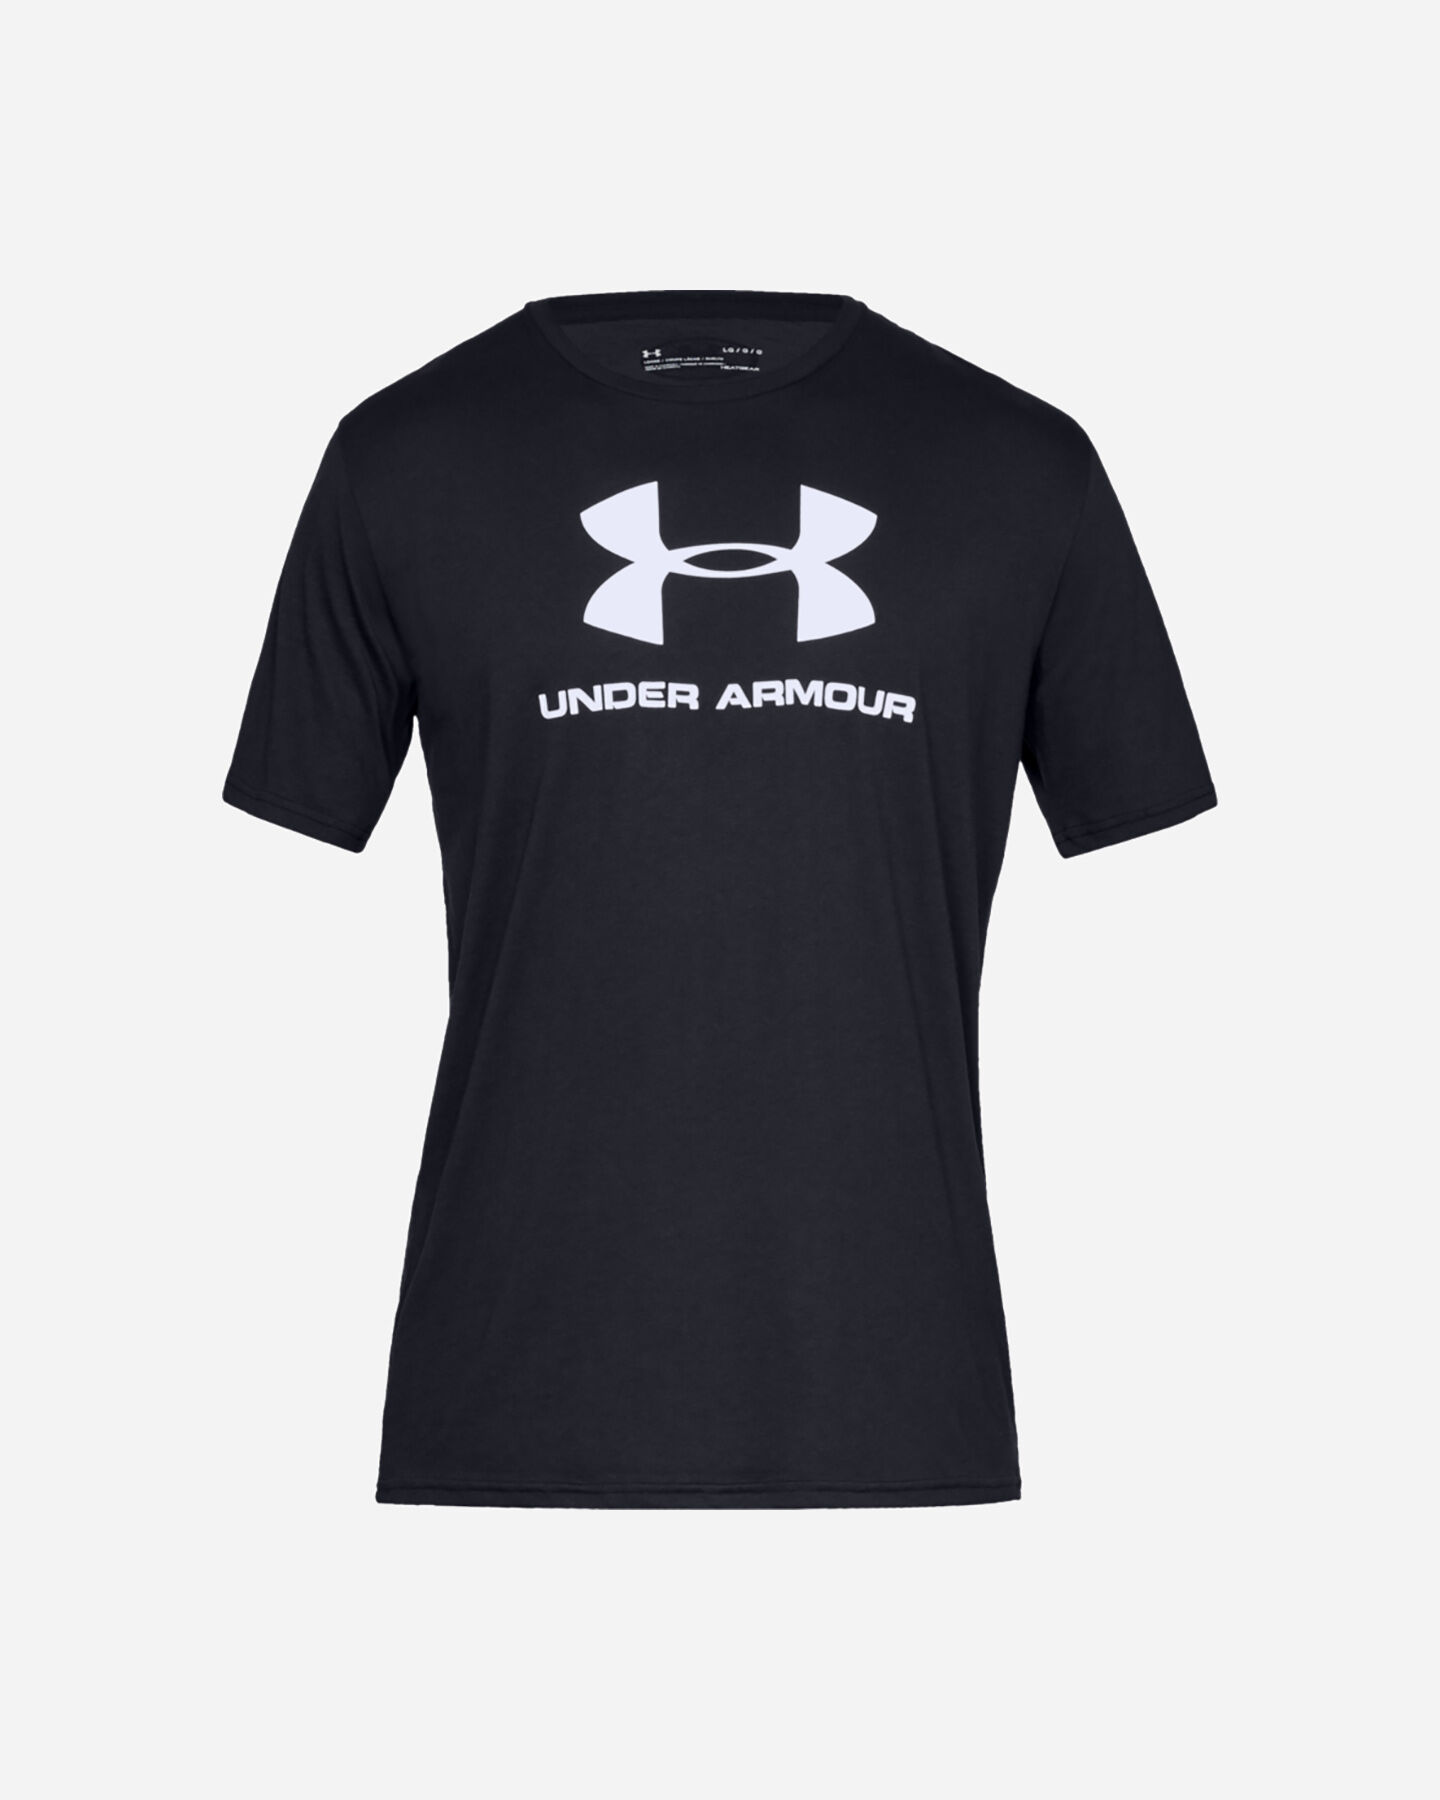  T-Shirt UNDER ARMOUR BIG LOGO M S5035486|0001|XS scatto 0